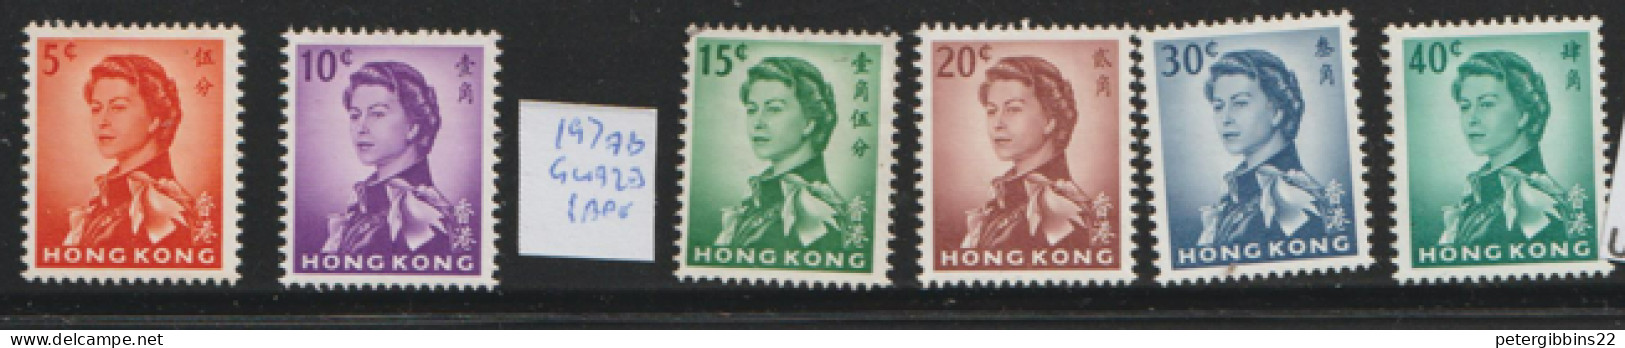 Hong Kong 1962 Definitives  Various Valus  Wmk  Upright  Mounted Mint - Unused Stamps